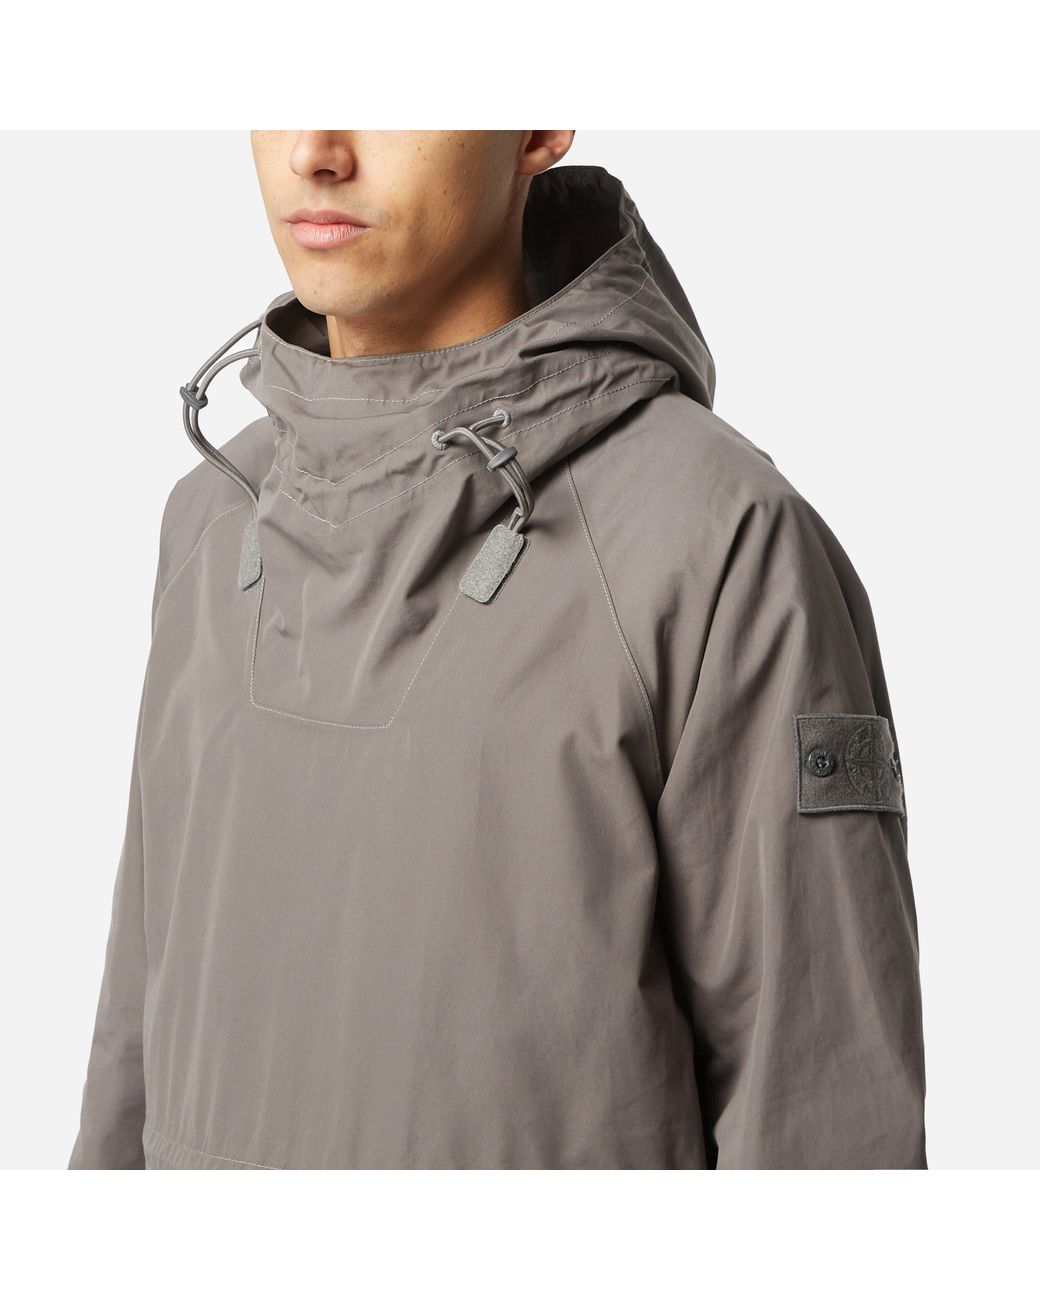 Stone Island Ghost Anorak in Gray for Men | Lyst